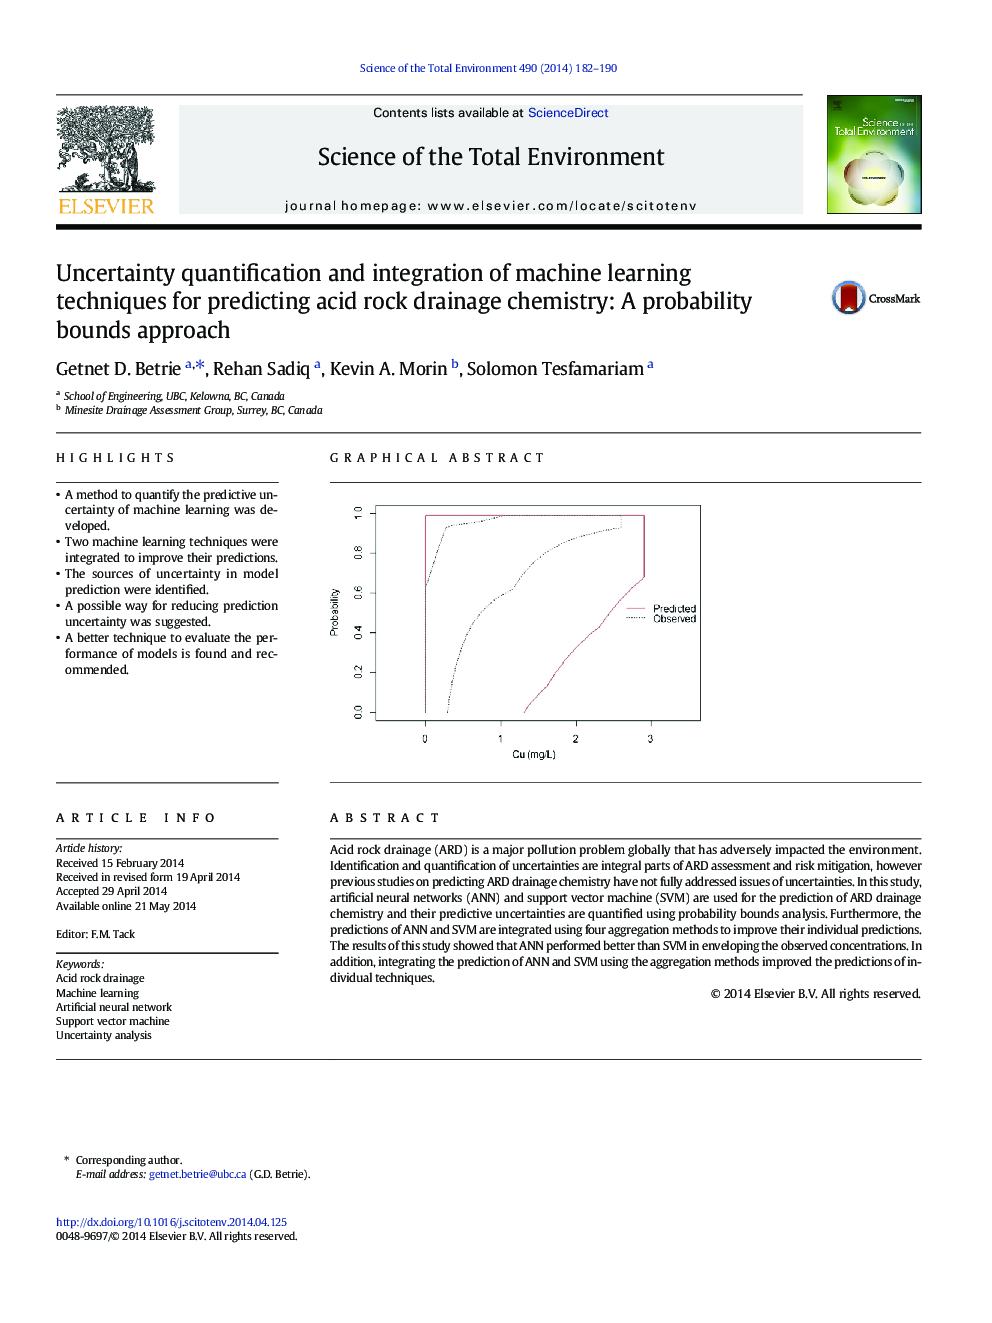 Uncertainty quantification and integration of machine learning techniques for predicting acid rock drainage chemistry: A probability bounds approach